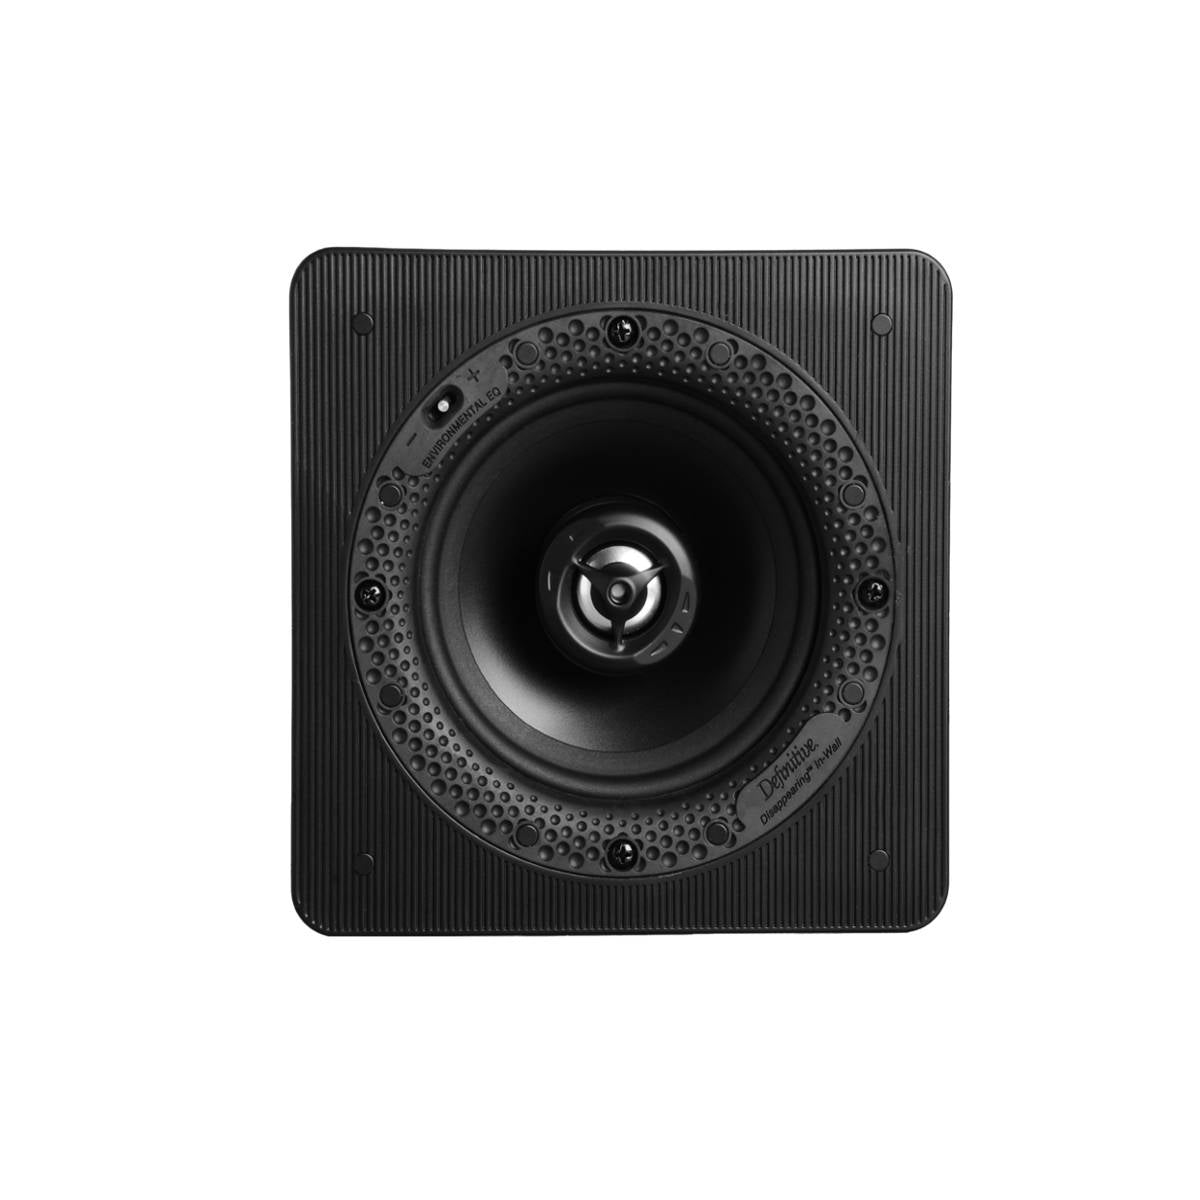 Definitive Technology DI 5.5 S Square 5.25” In-Wall / In-Ceiling Speaker (Each) - Ooberpad India